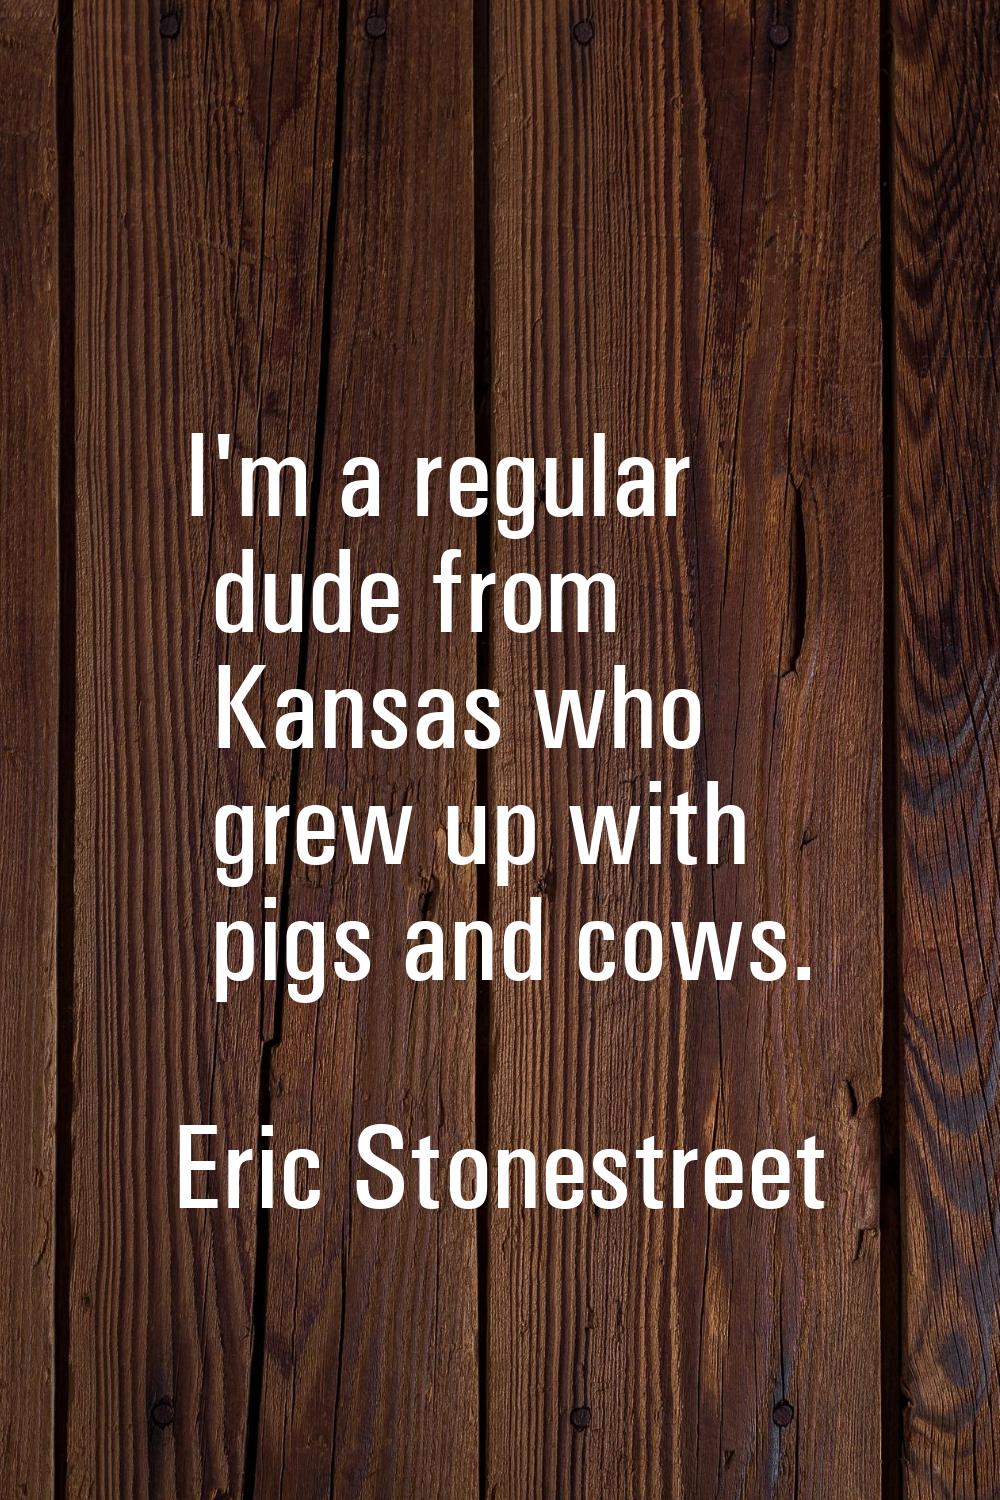 I'm a regular dude from Kansas who grew up with pigs and cows.